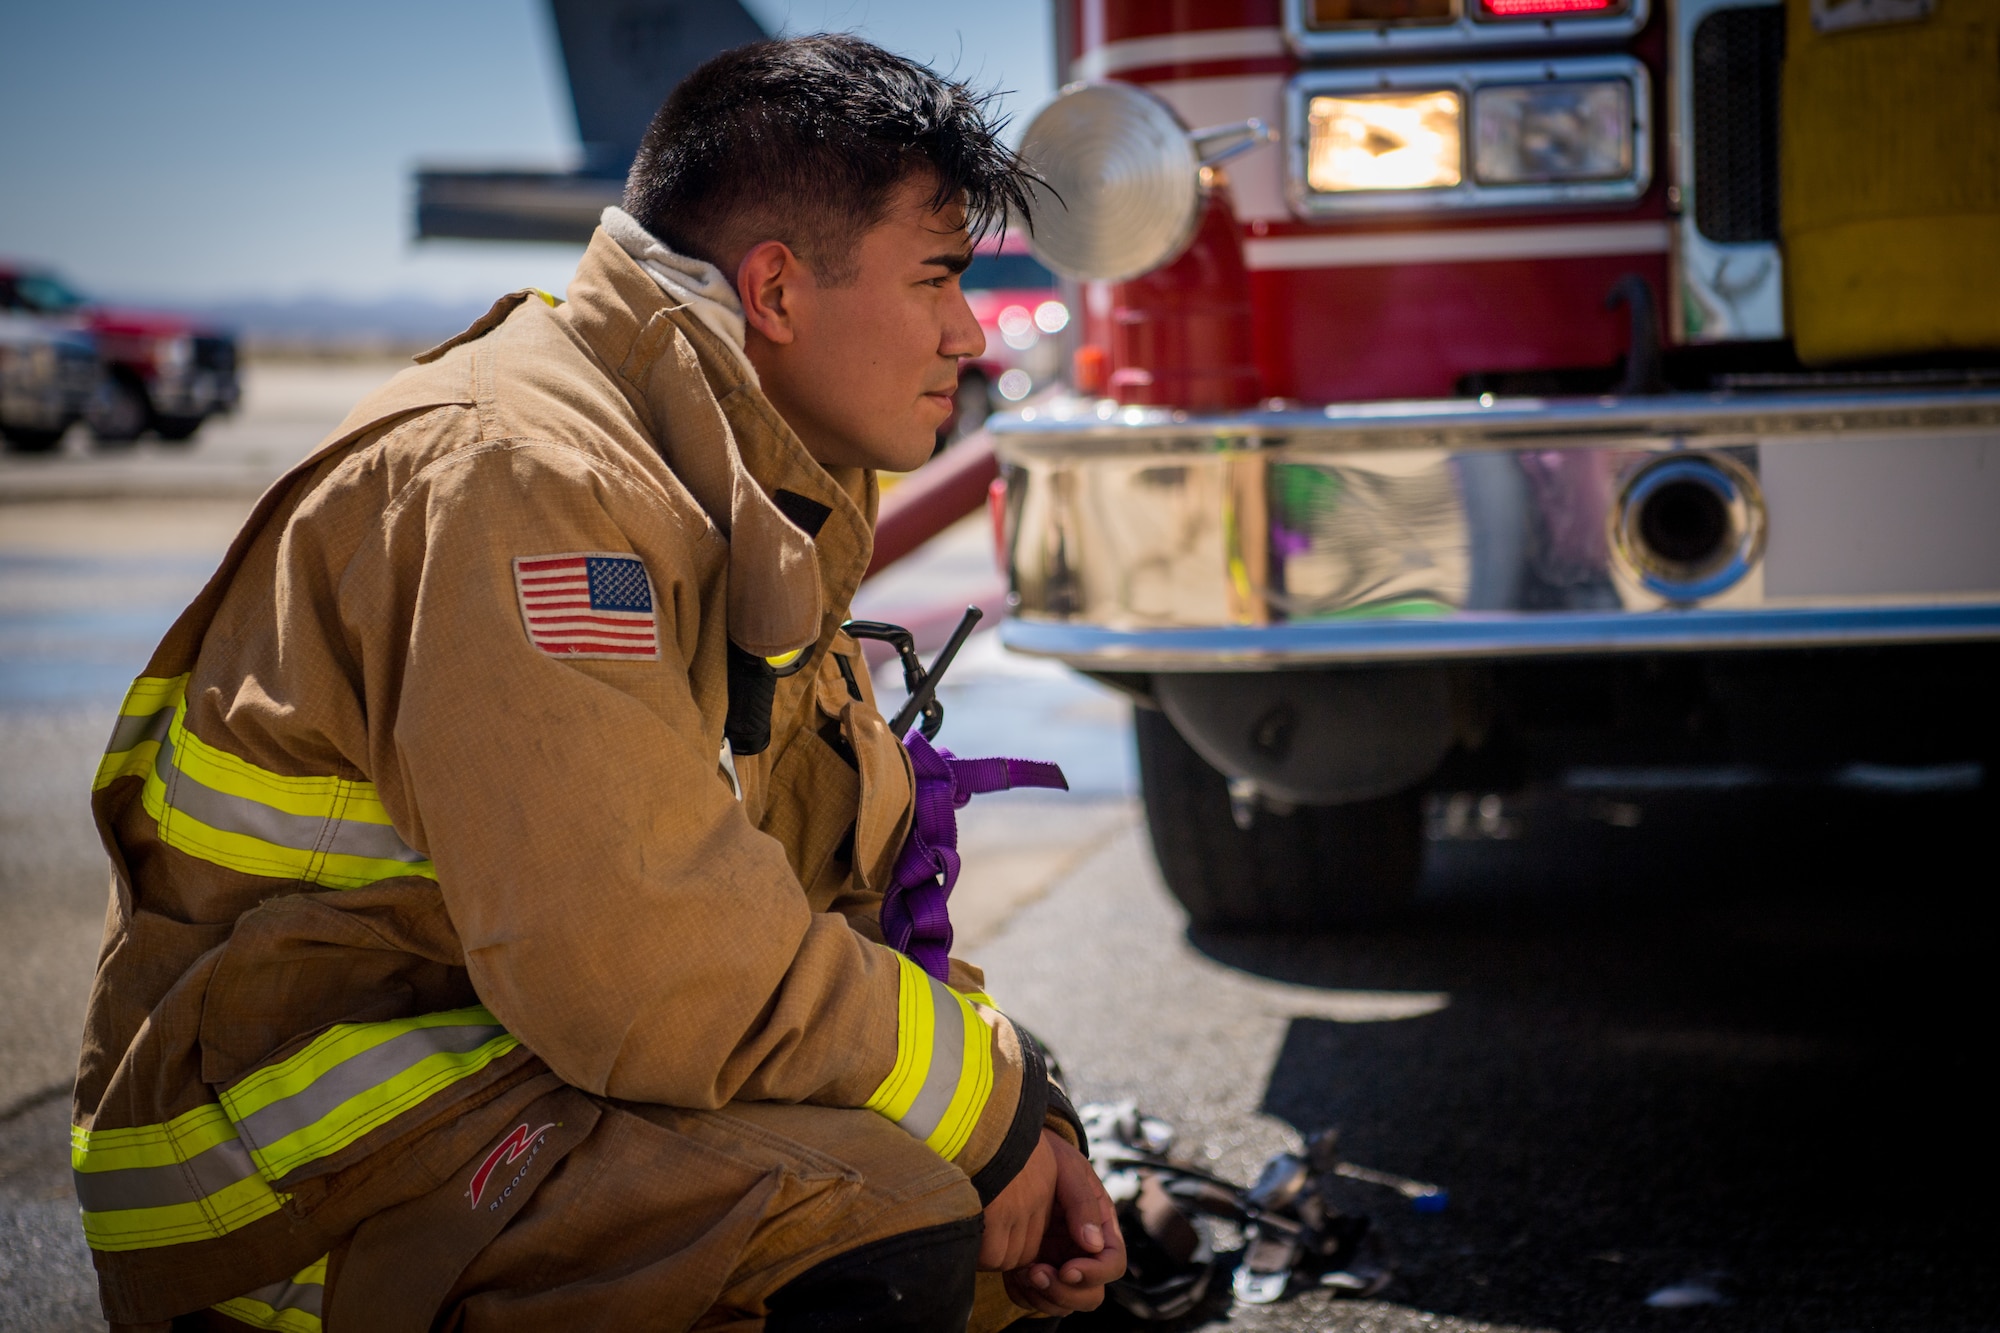 Firefighter Senior Airman Rene Rosas takes a break following search and rescue training at a recently remodeled hangar at Edwards Air Force Base, California, July 23. The unique training opportunity provided the firefighters a mentally and physically demanding training scenario. (Air Force photo by Chris Dyer)